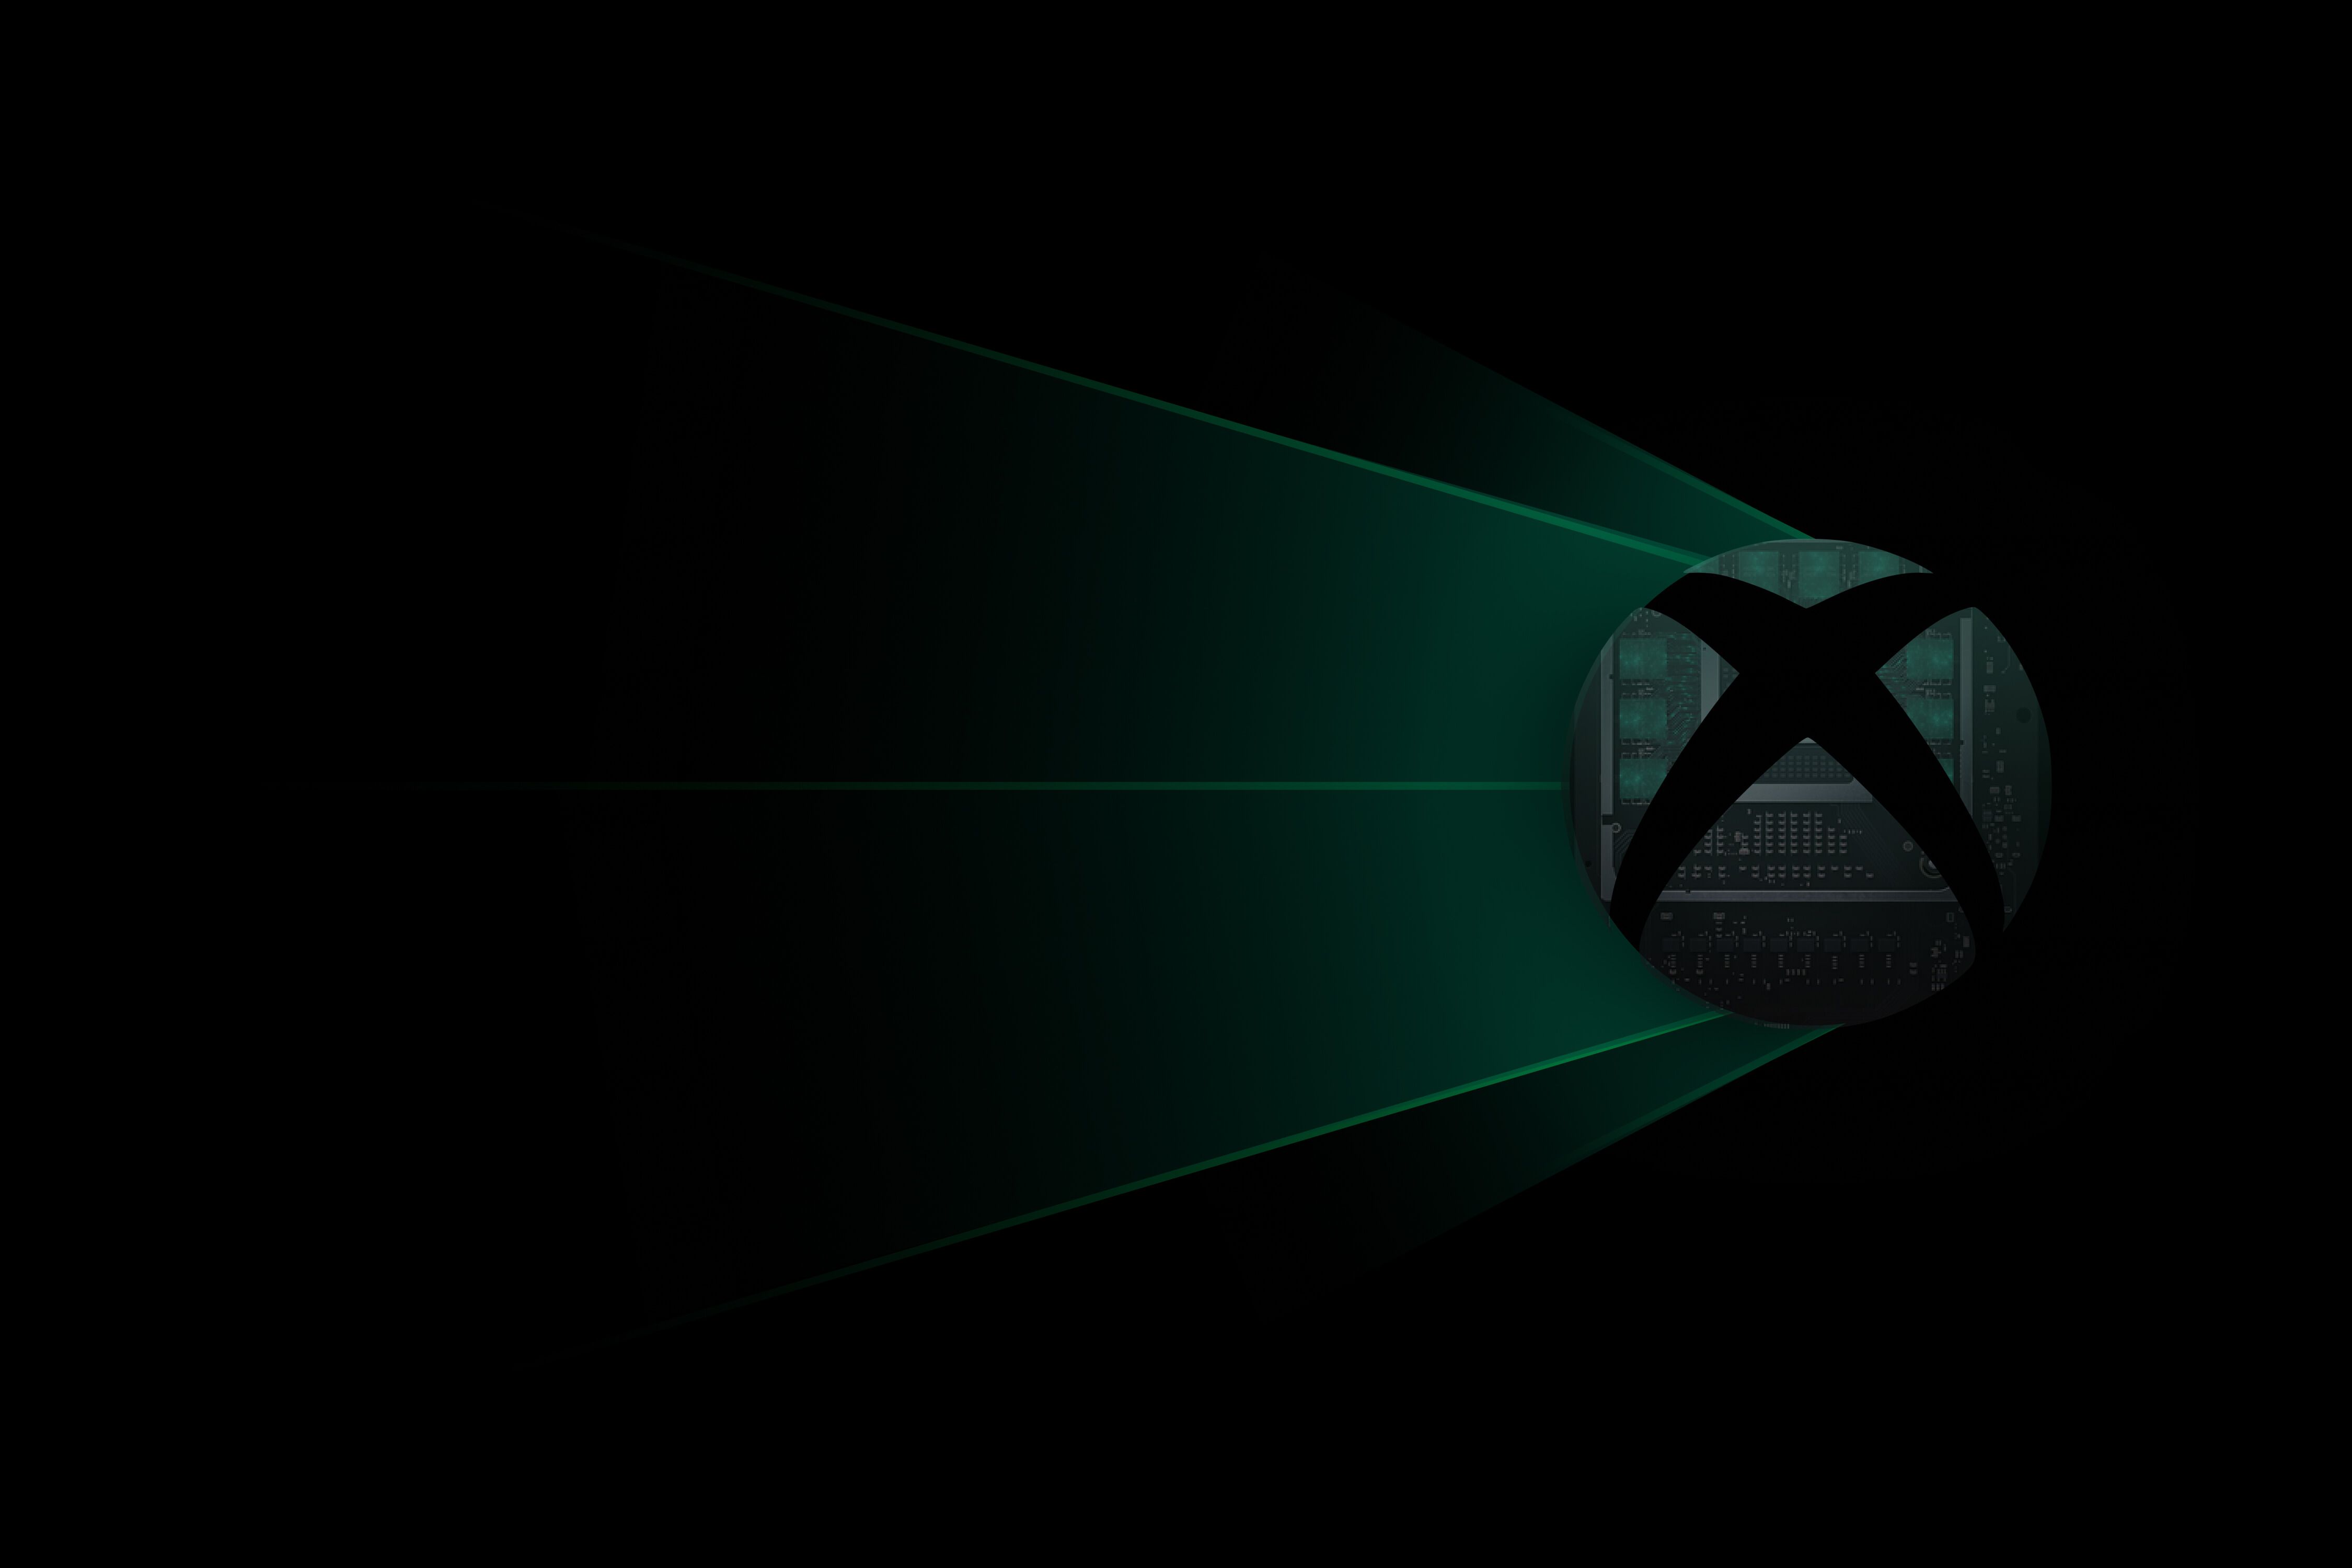 Xbox Series X Logo Wallpapers Wallpaper Cave